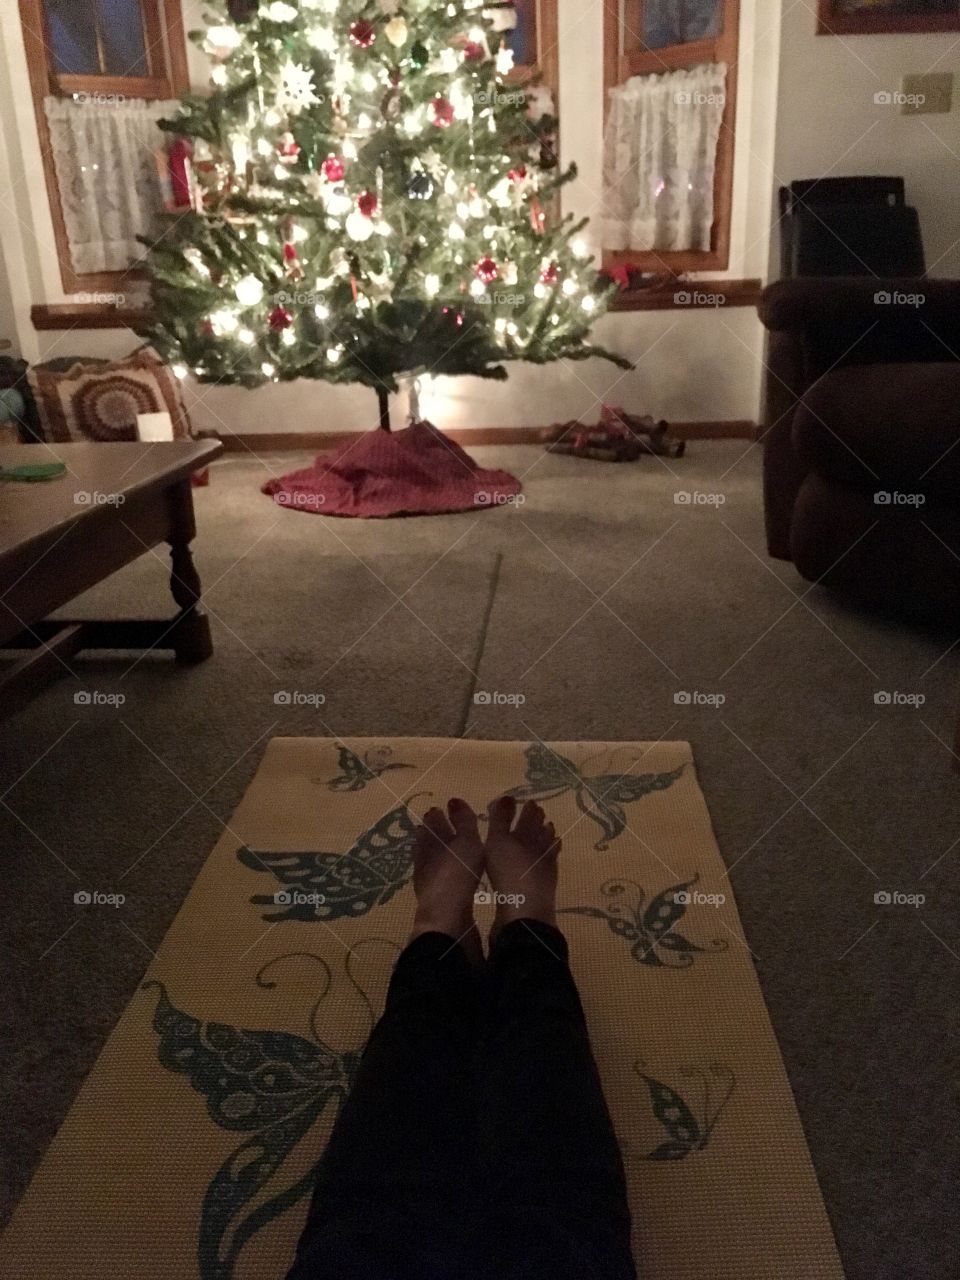 Yoga by holiday light.